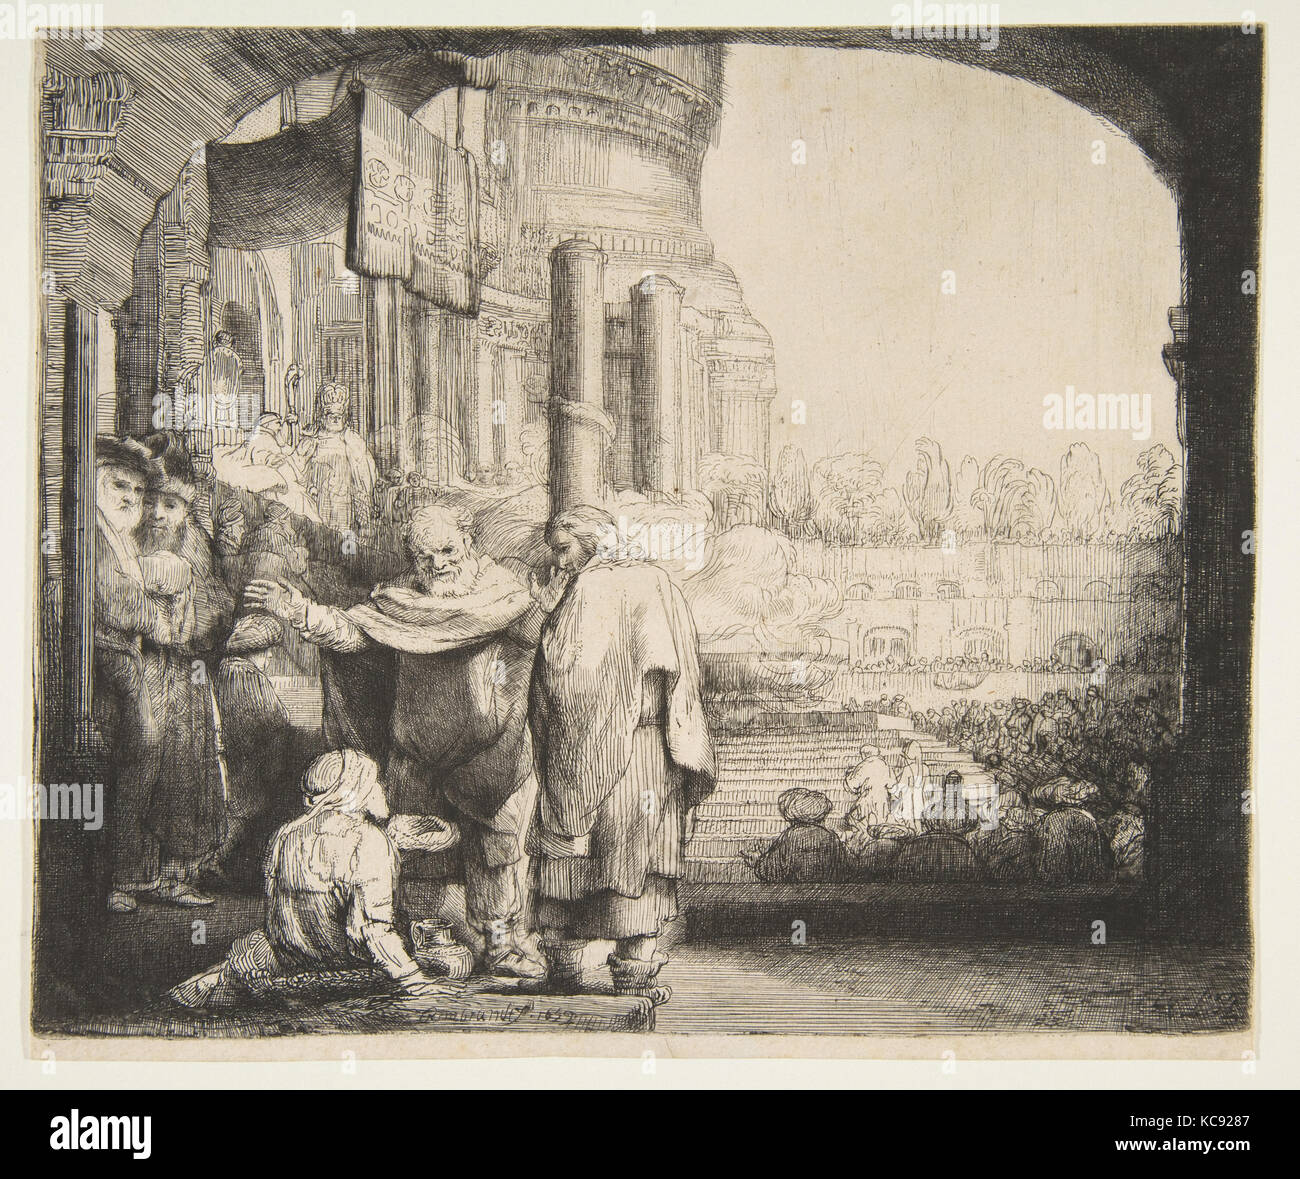 Peter and John Healing the Cripple at the Gate of the Temple, Rembrandt, 1659 Stock Photo